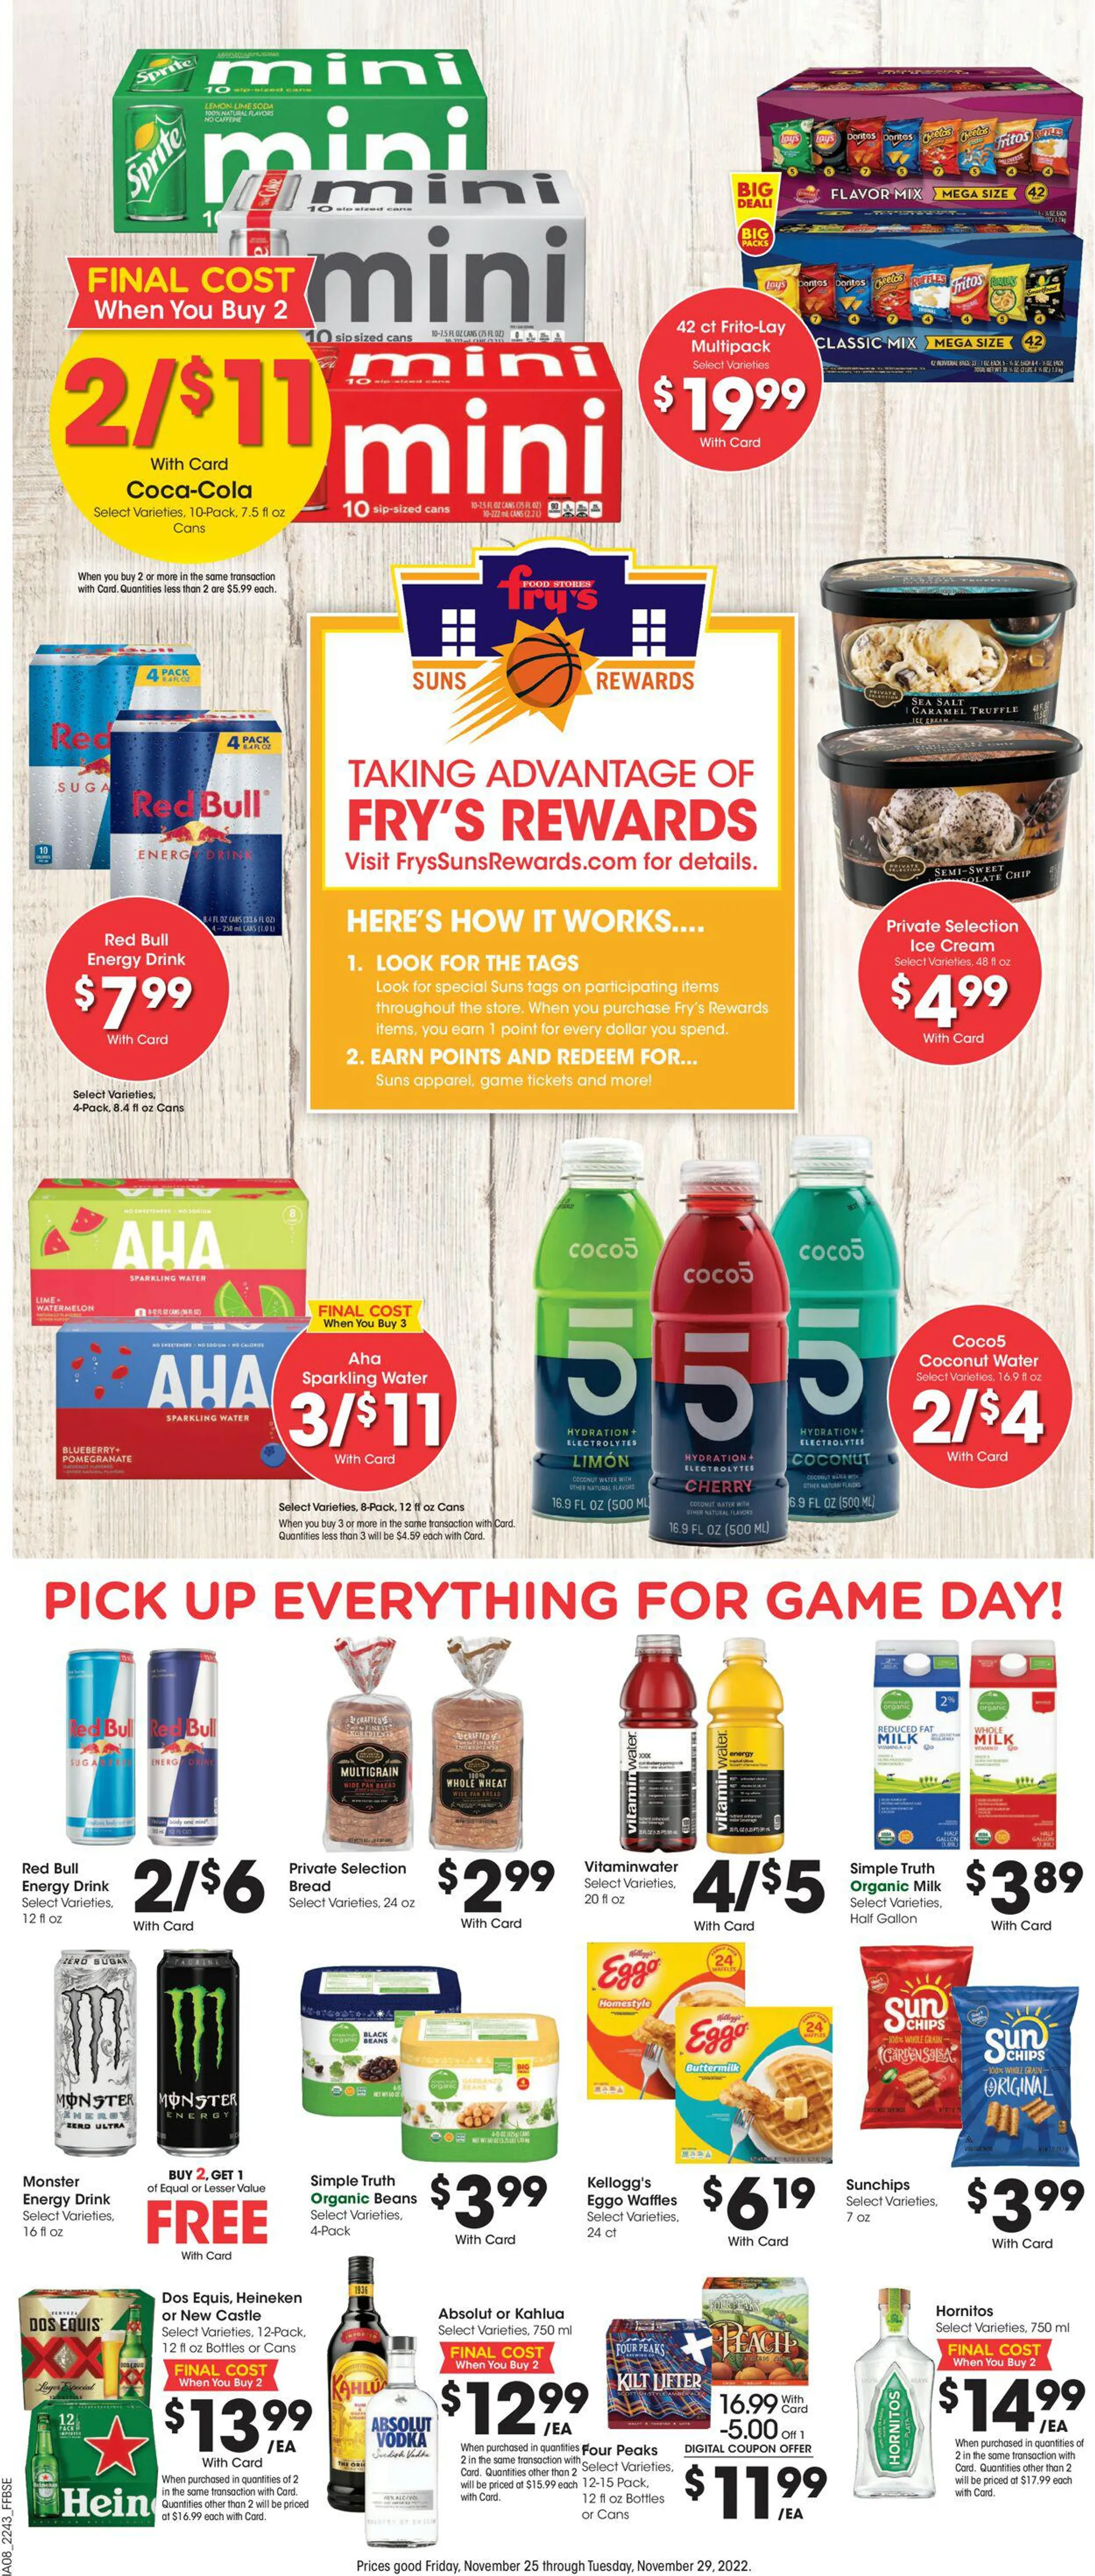 Fry’s Current weekly ad - 11